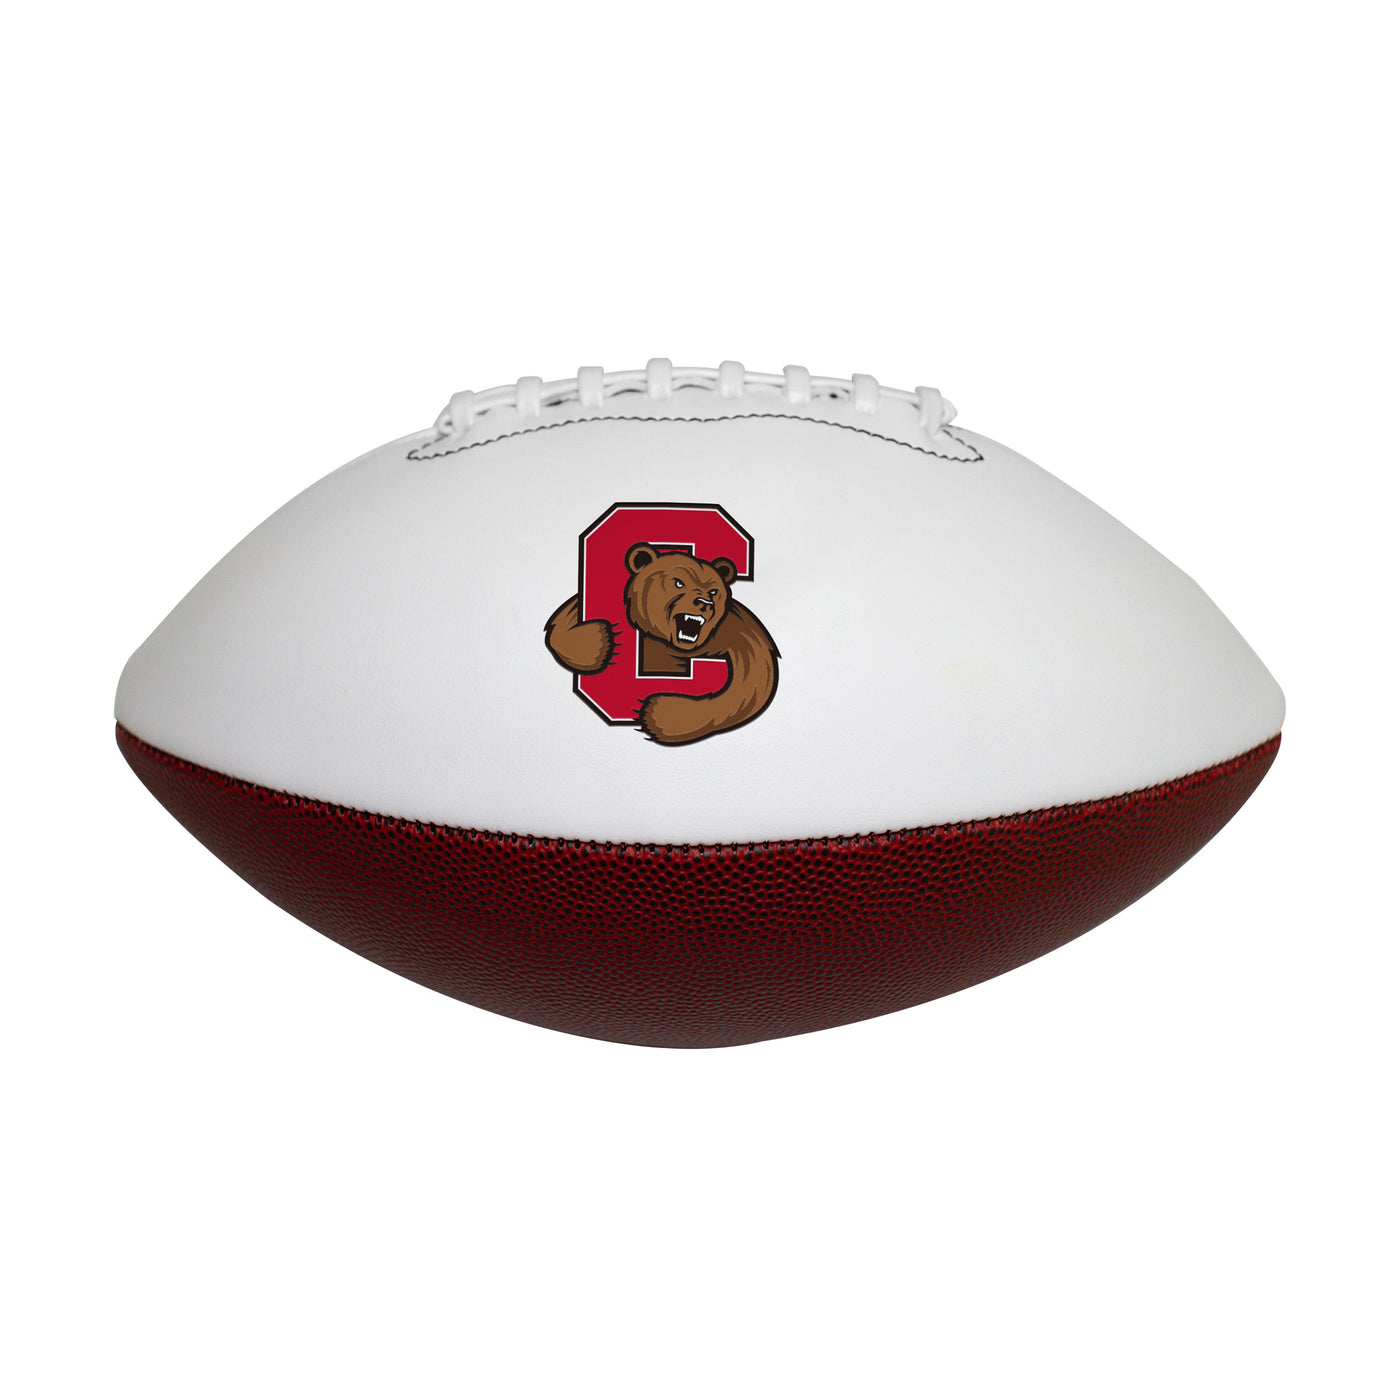 Cornell Official-Size Autograph Football